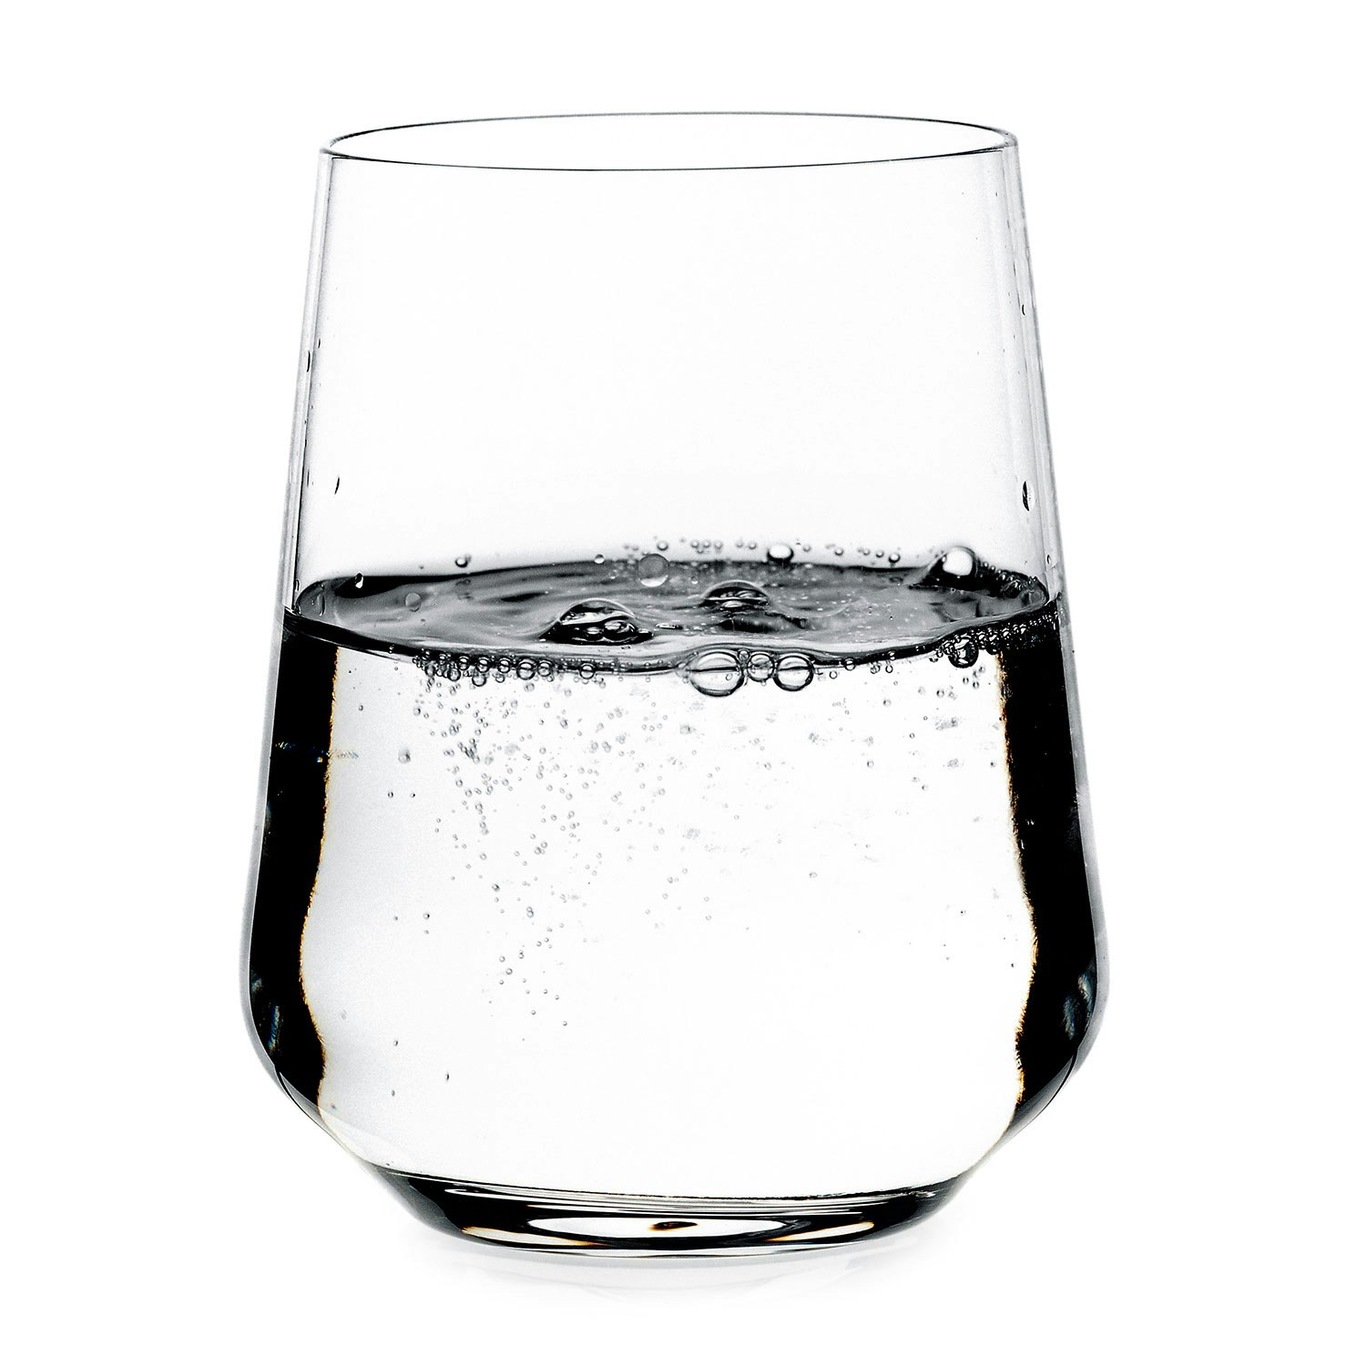 https://royaldesign.com/image/11/iittala-essence-water-glass-35-cl-set-of-4-clear-1?w=800&quality=80